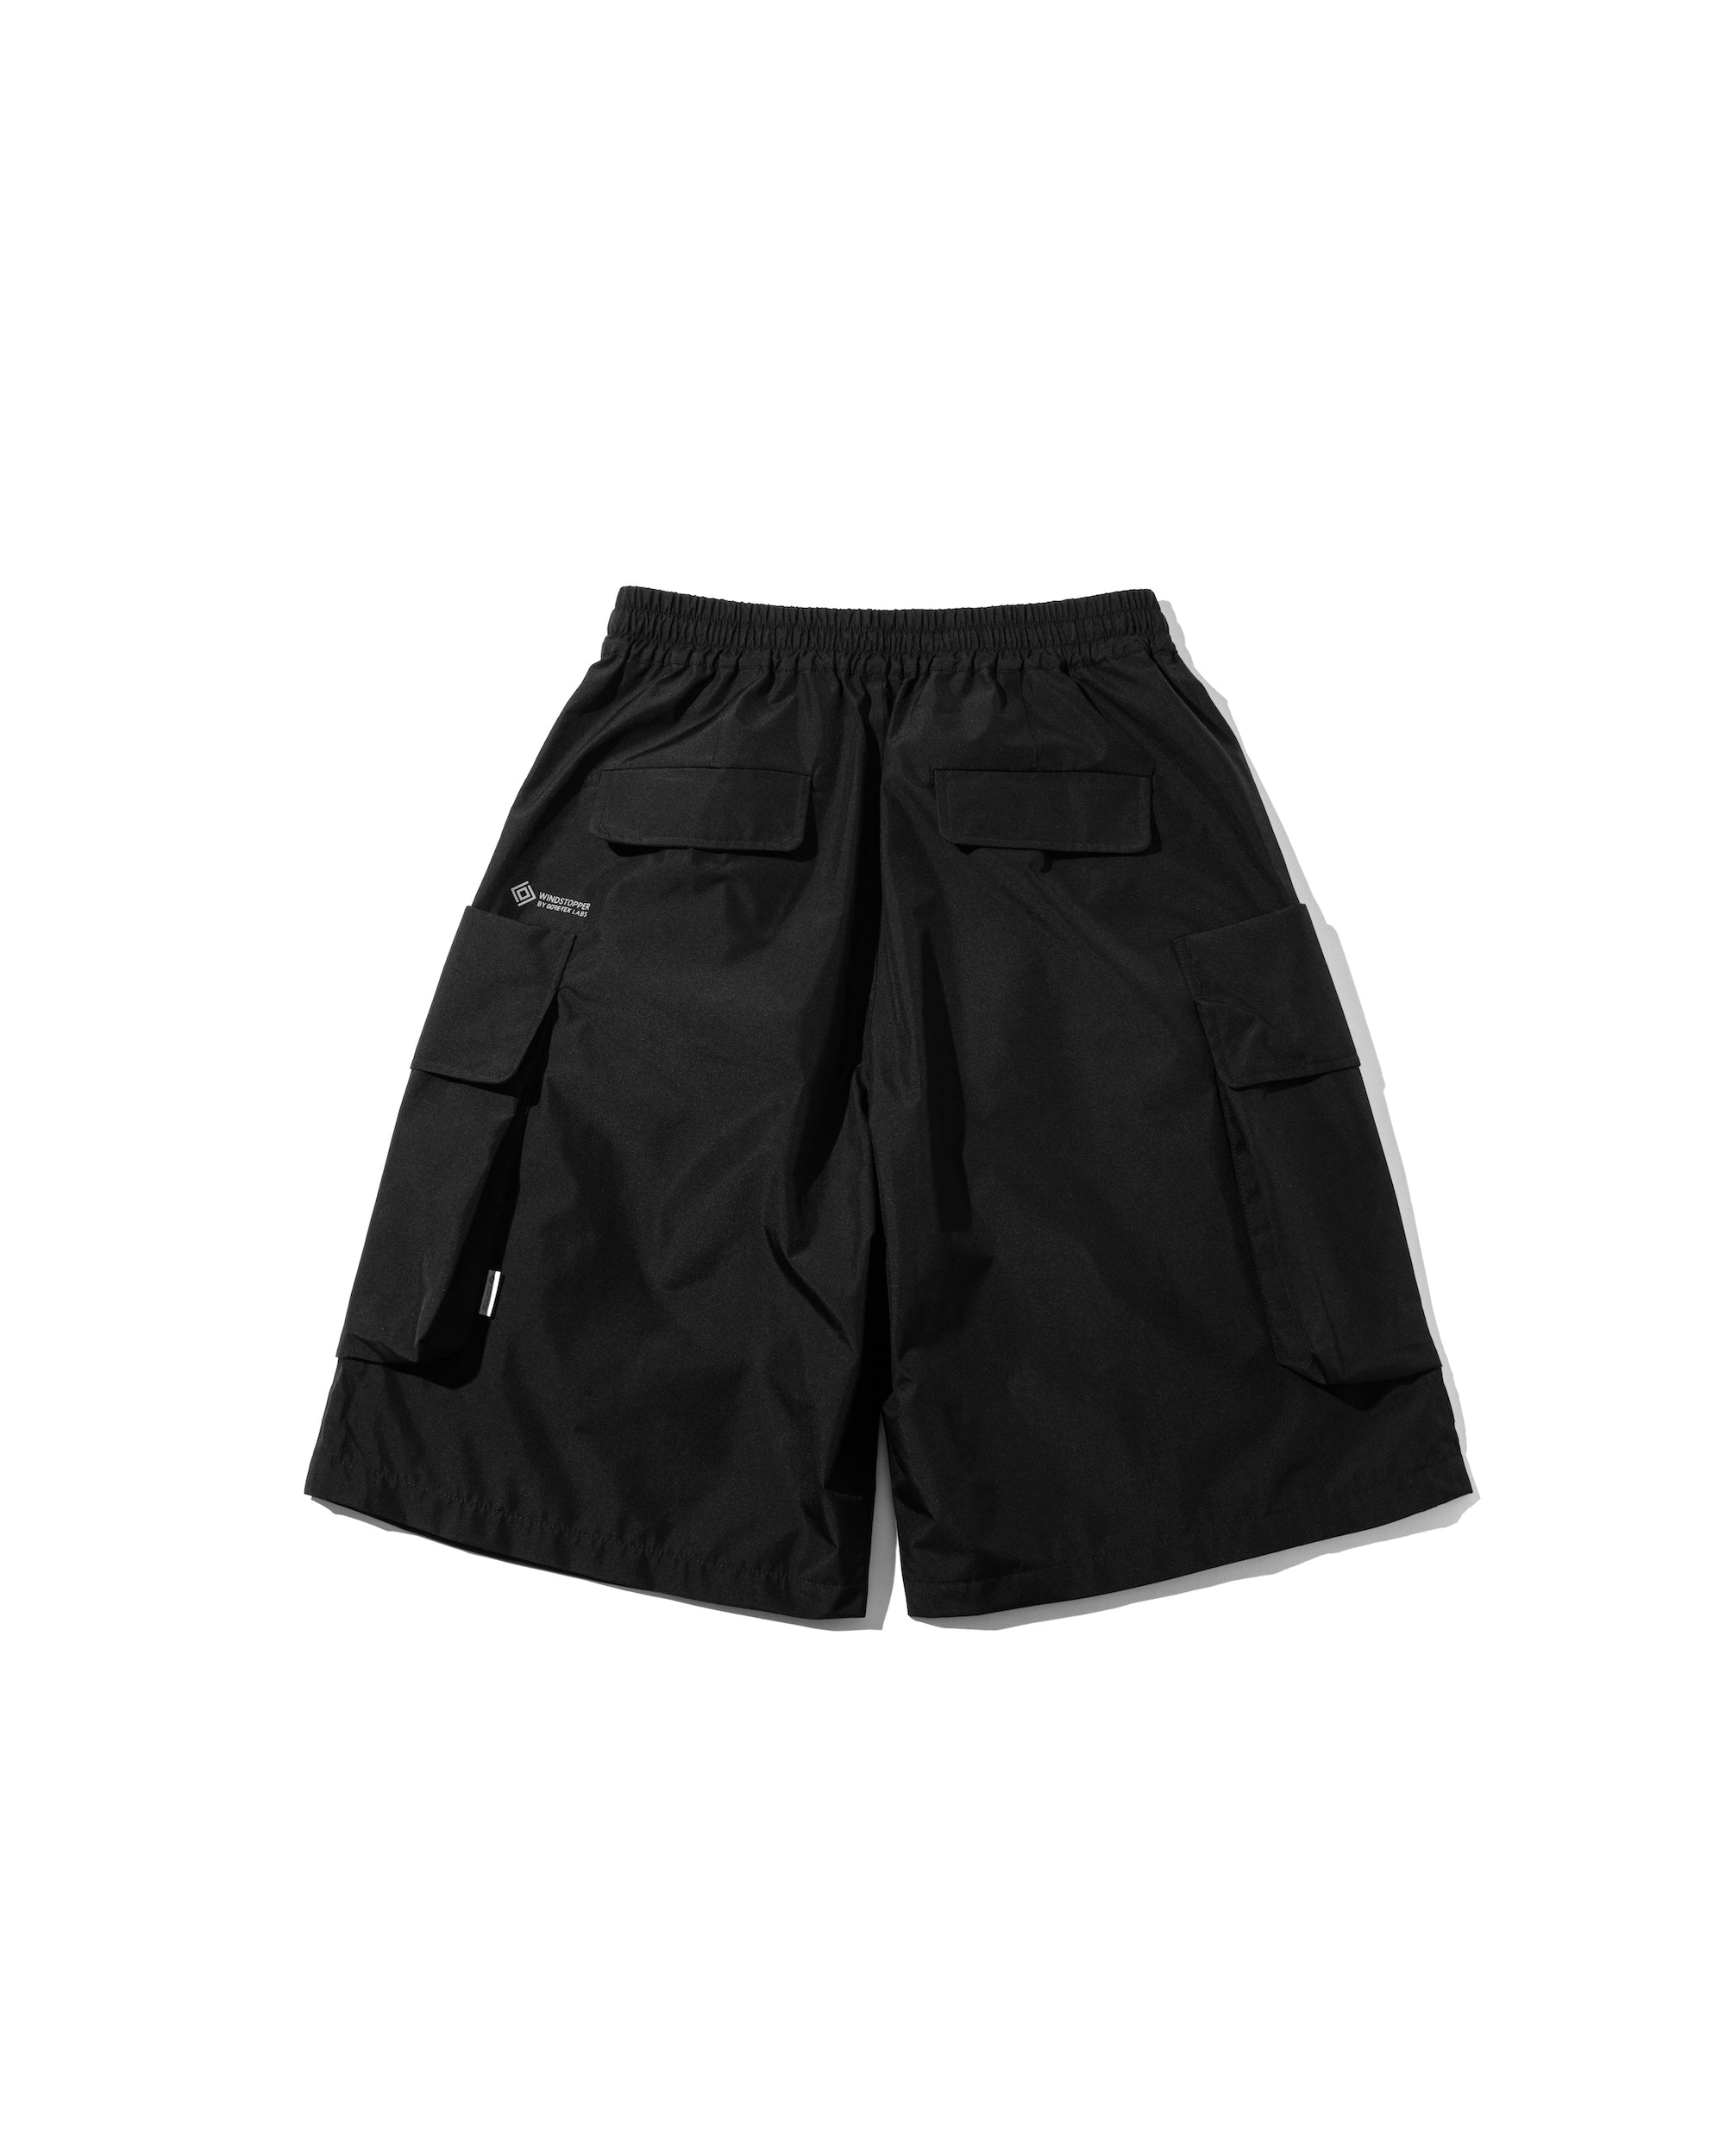 +phenix WINDSTOPPER® by GORE-TEX LABS CITY MILITARY HALF PANTS